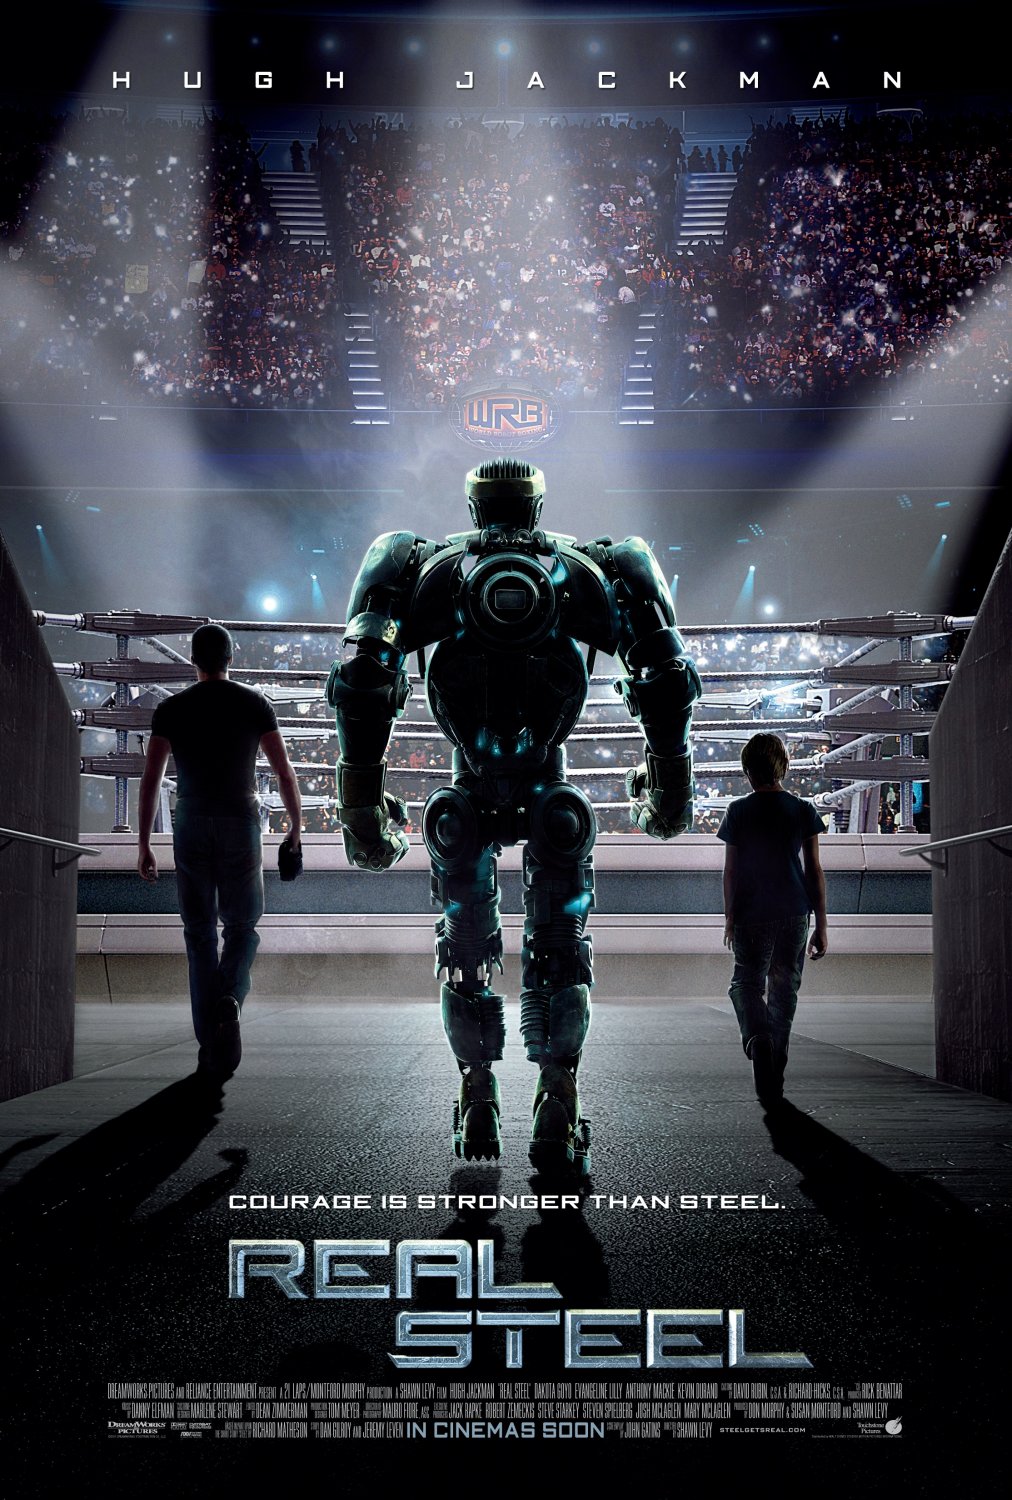 Extra Large Movie Poster Image for Real Steel (#2 of 10)